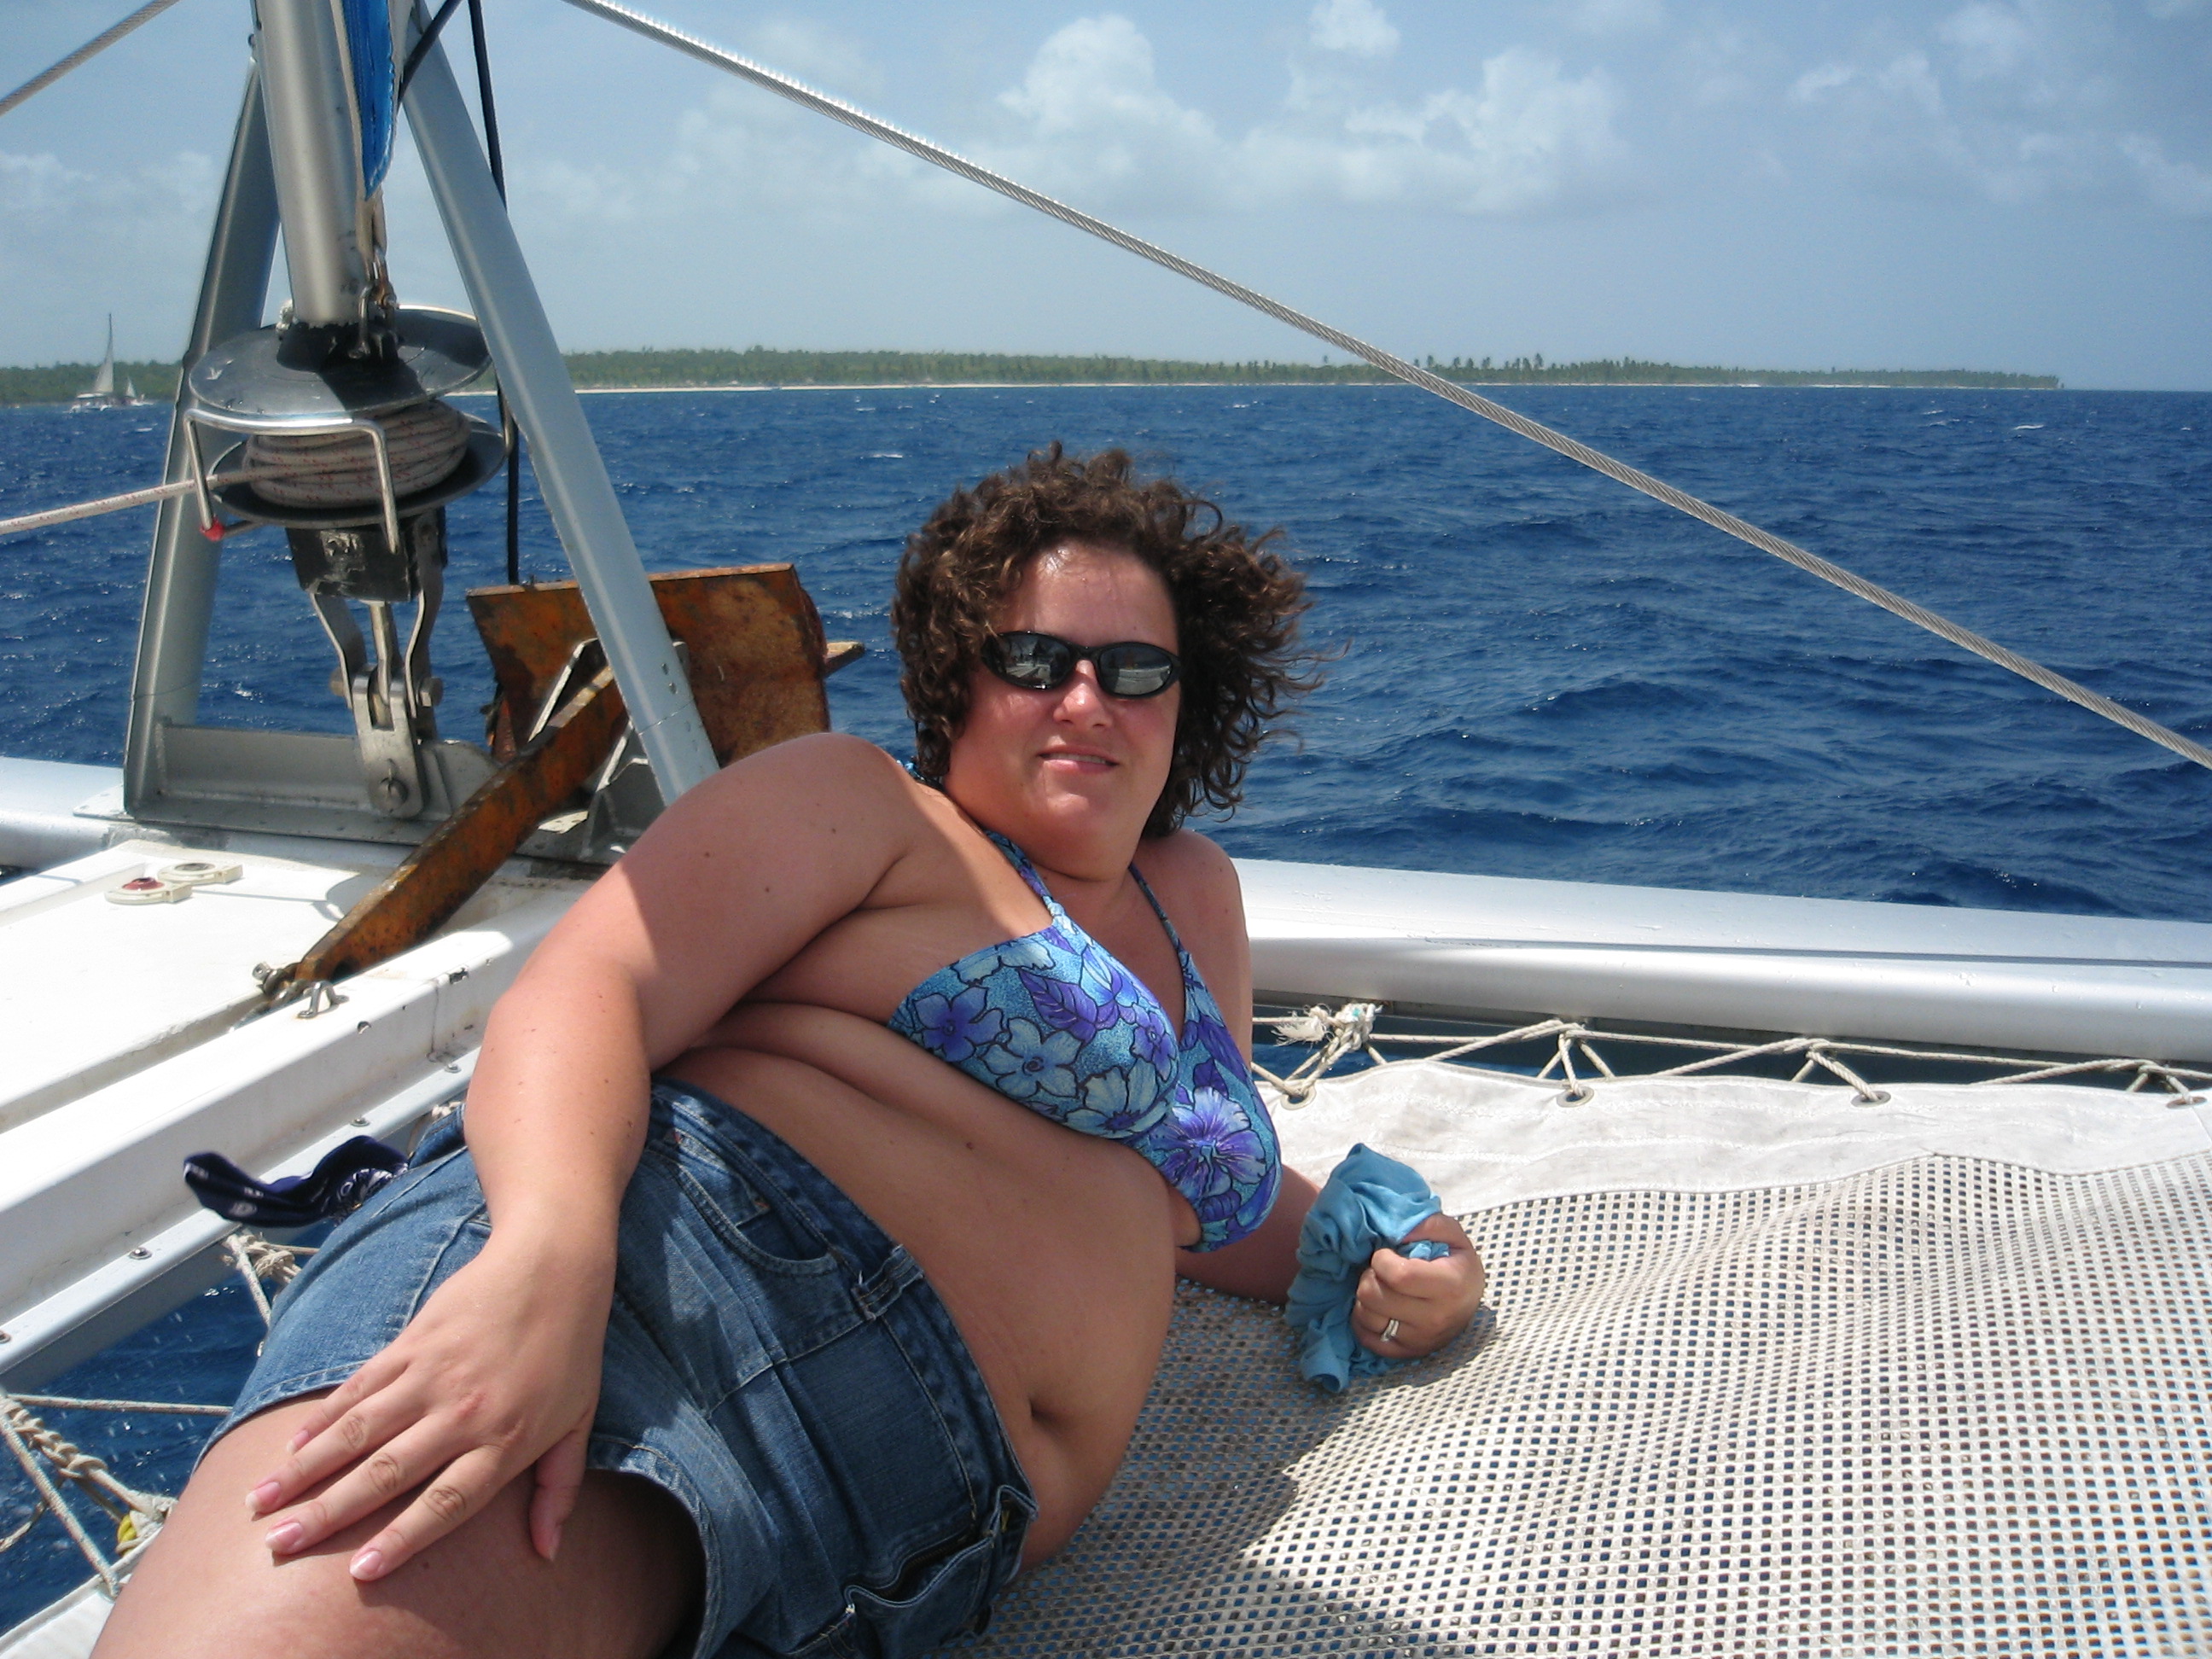 Katie on the net at the front of the Catamaran